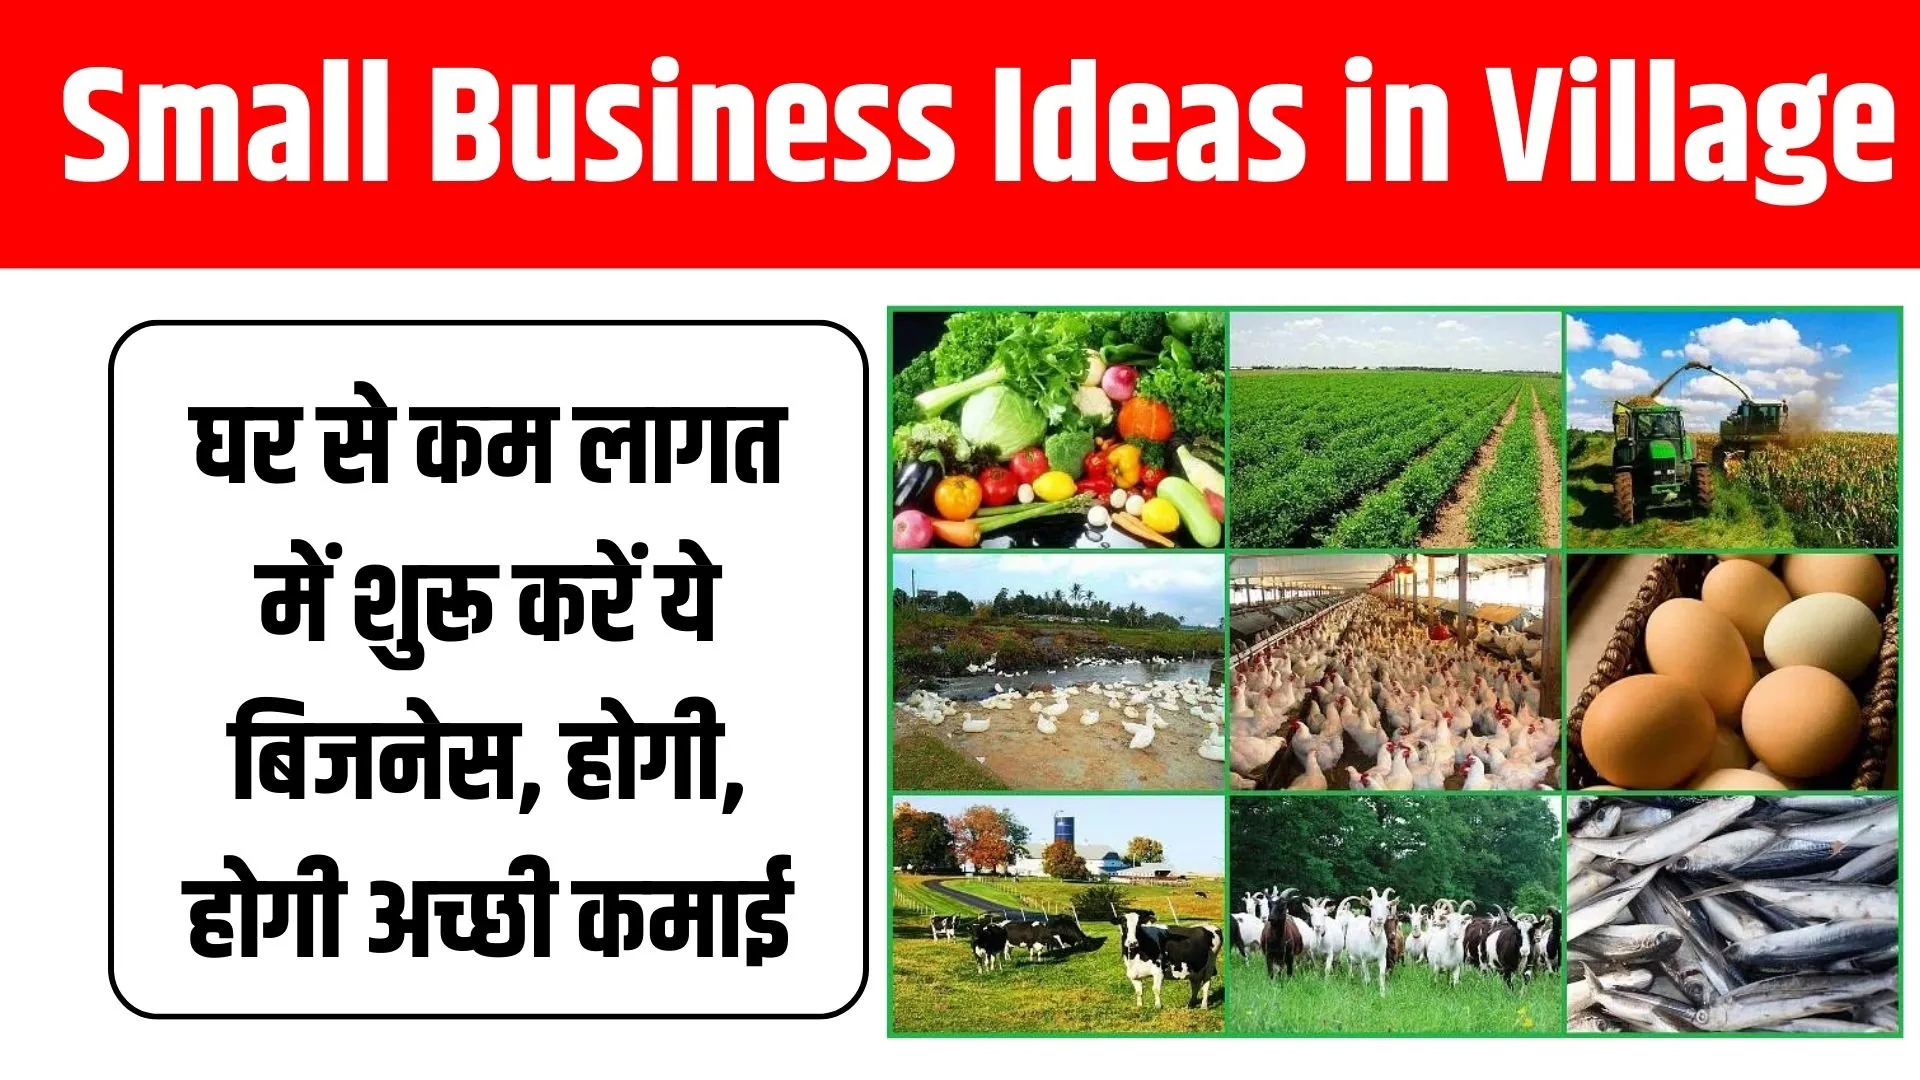 Small Business Ideas in Village